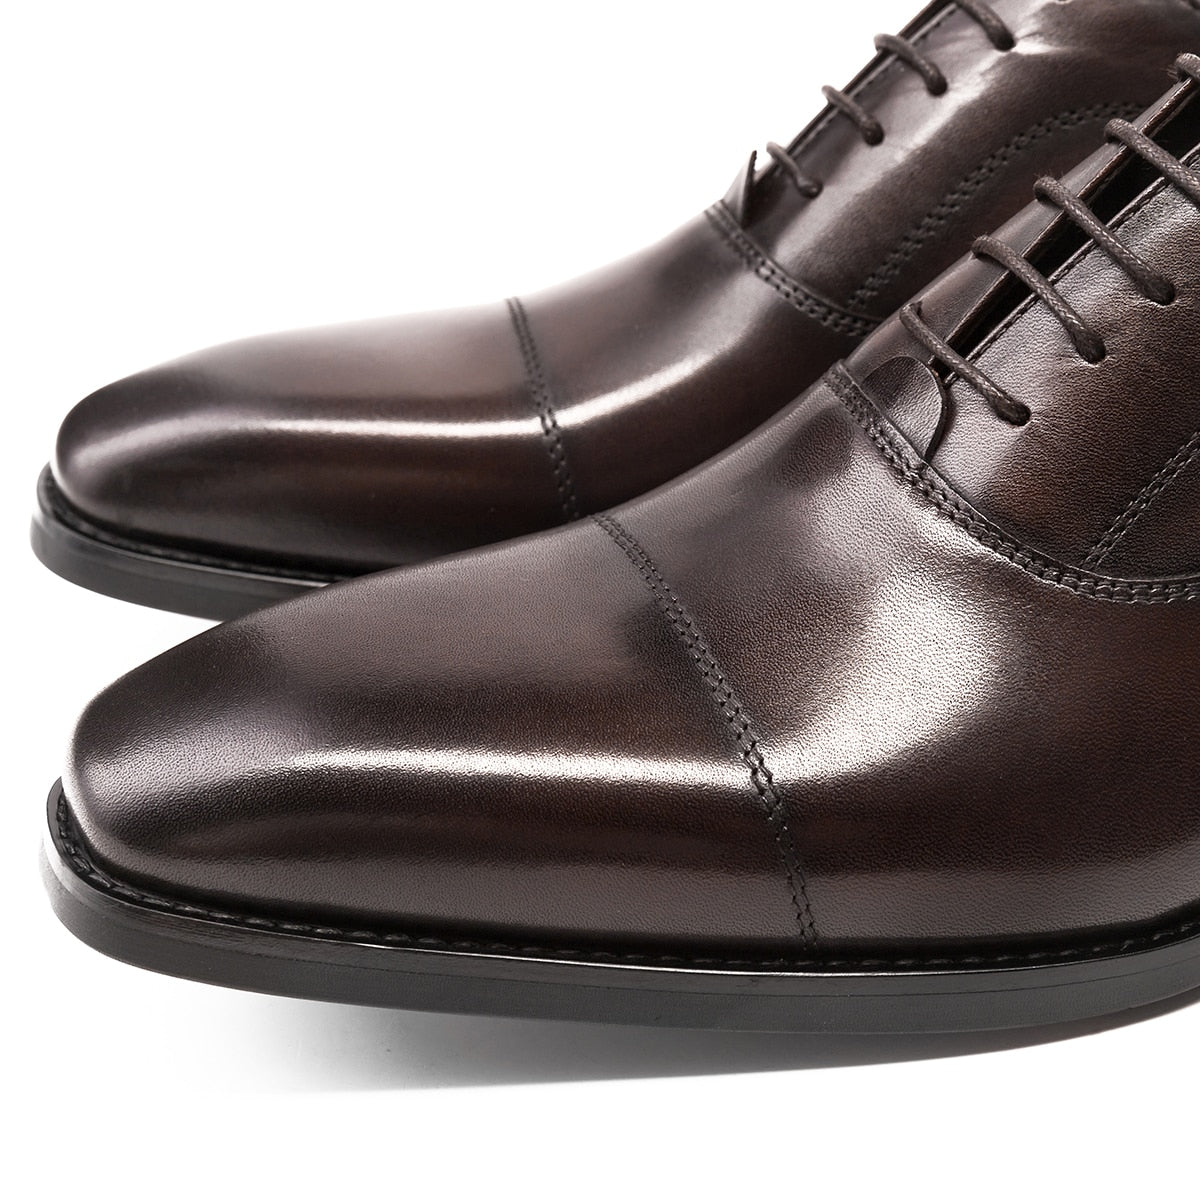 High Quality Luxury Oxford Shoes Genuine Leather Men